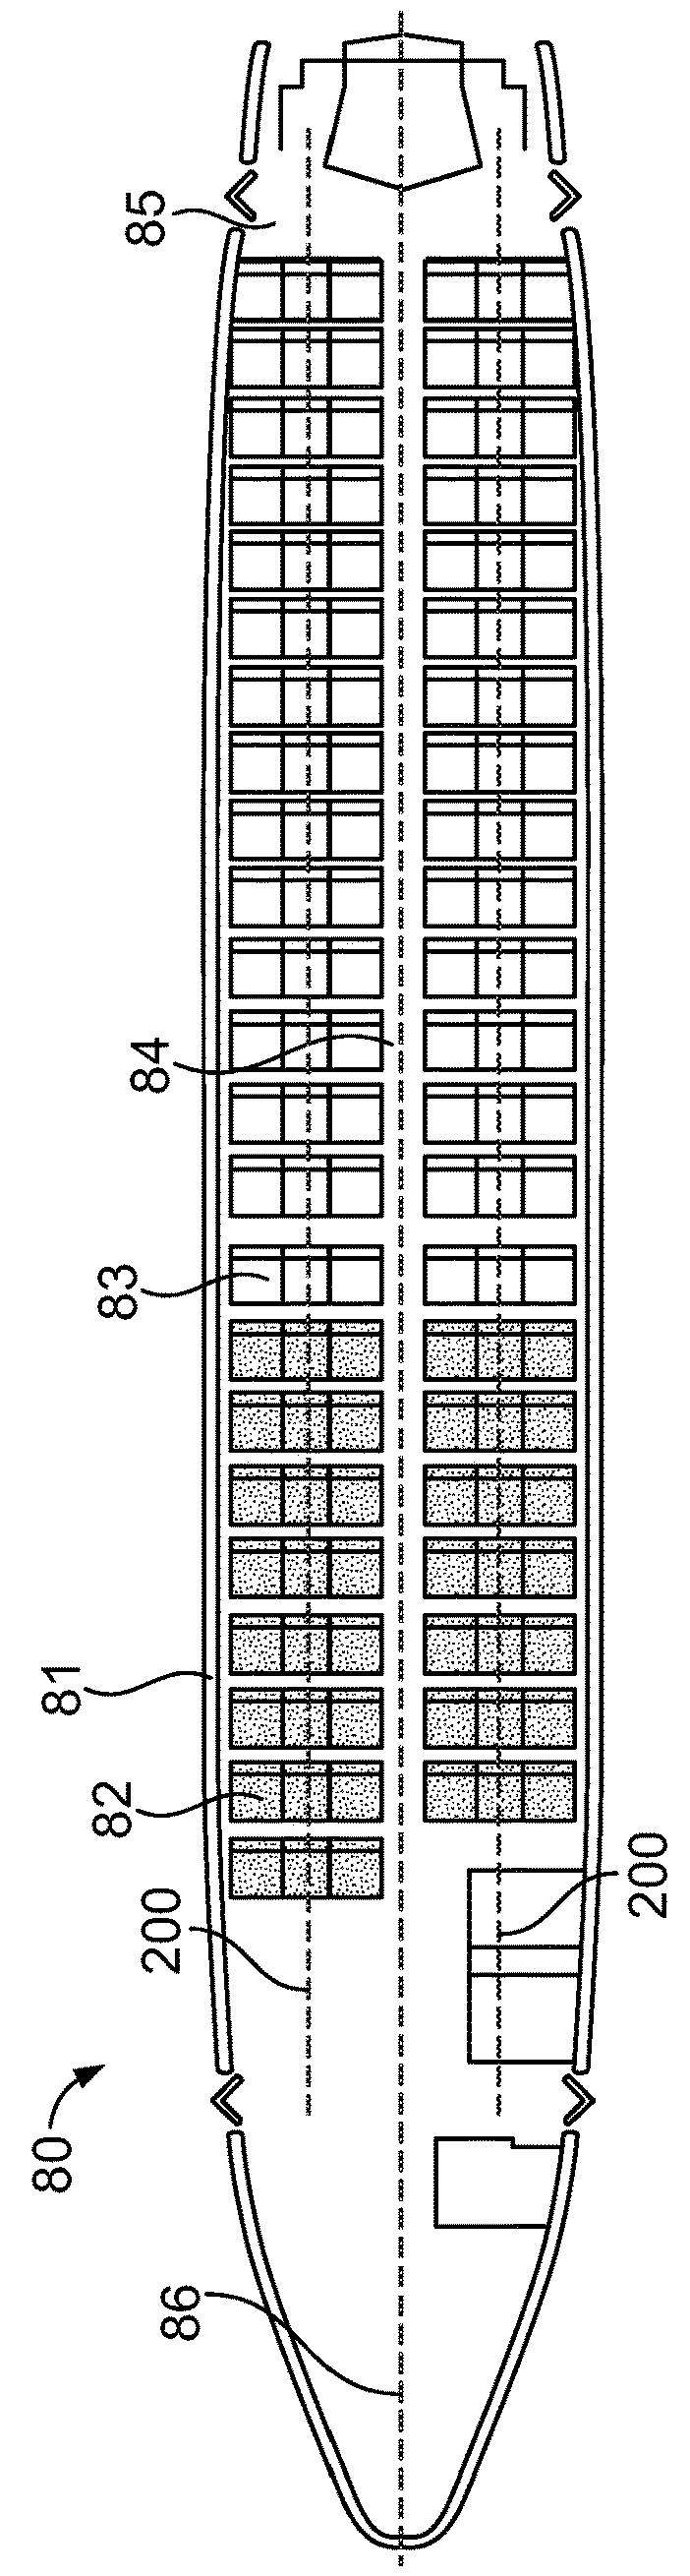 Carpet display systems and methods